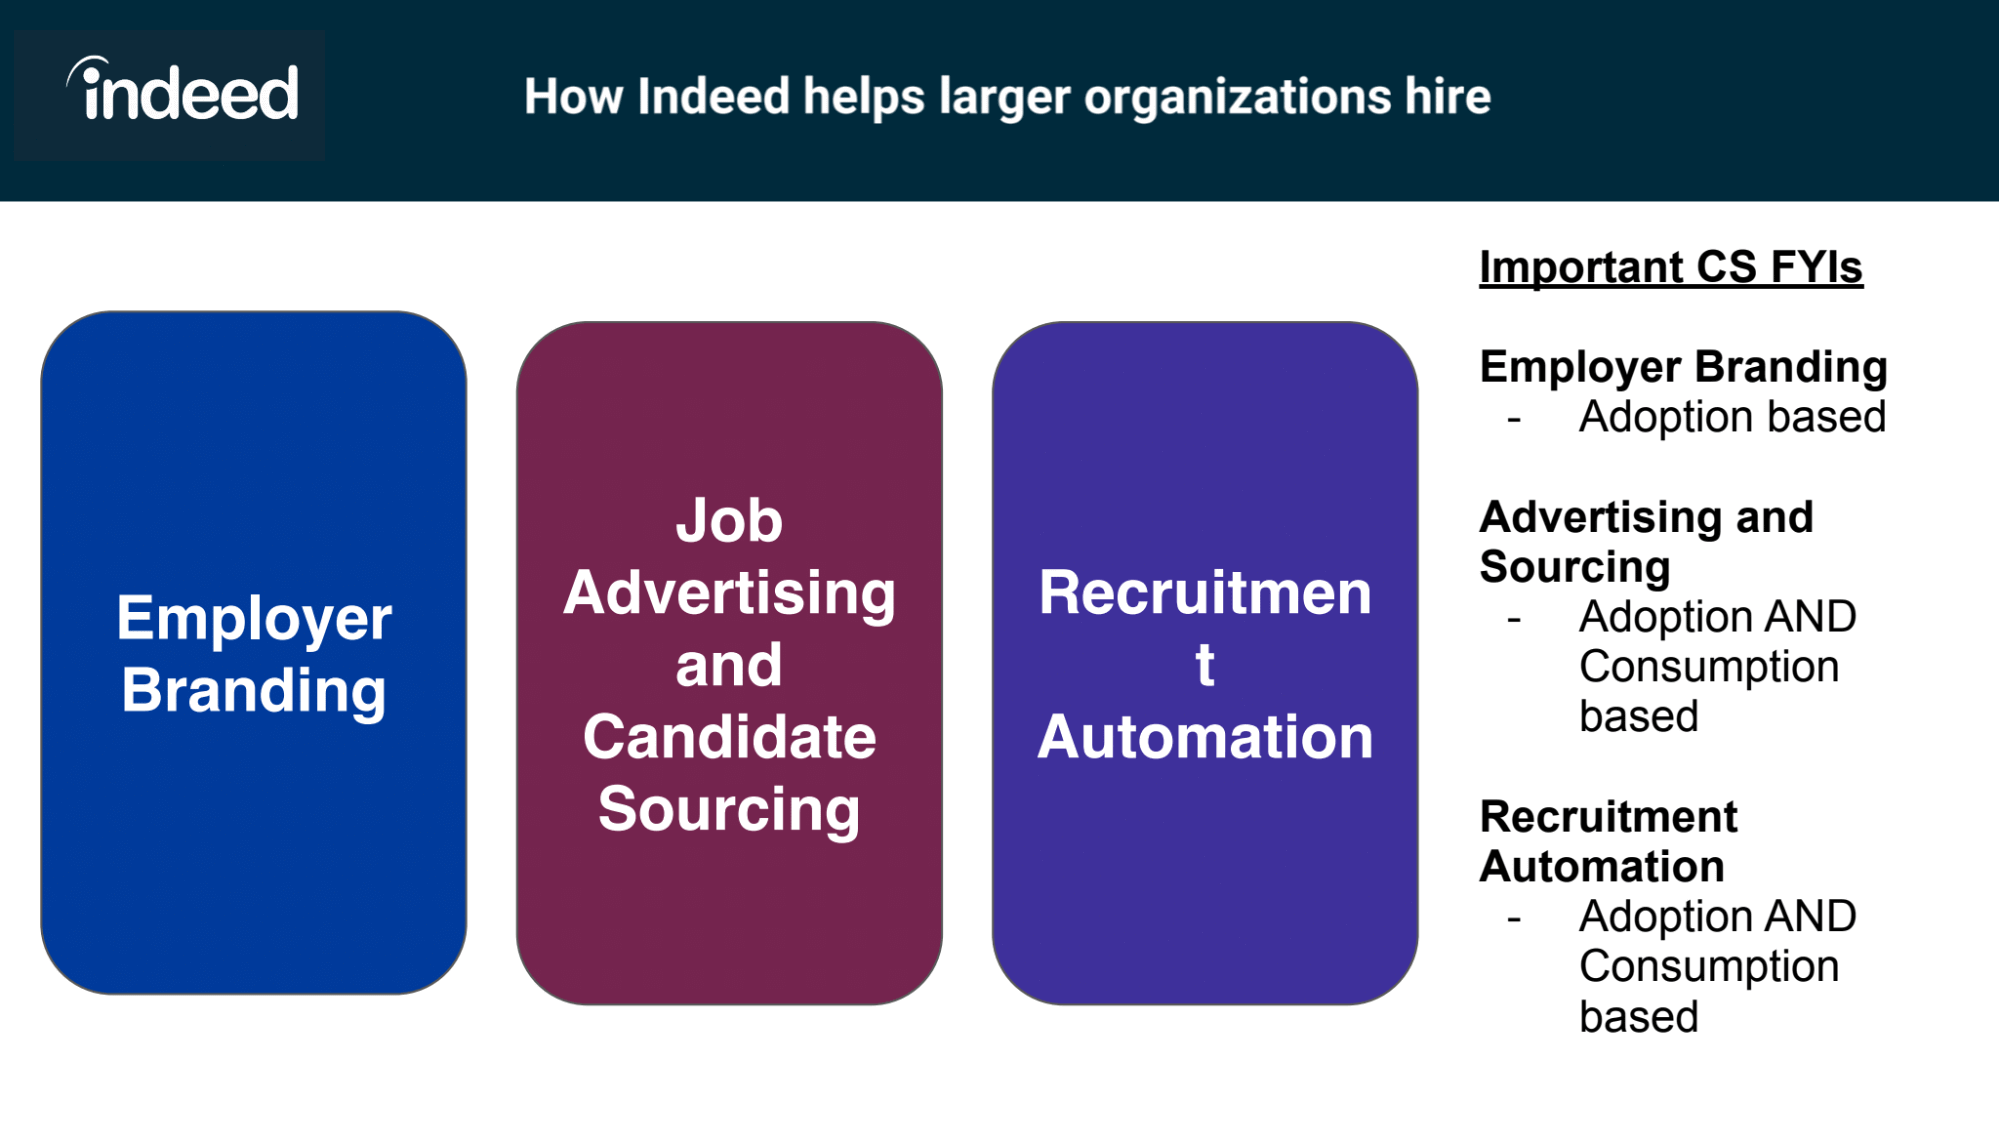 How Indeed helps larger organizations hire